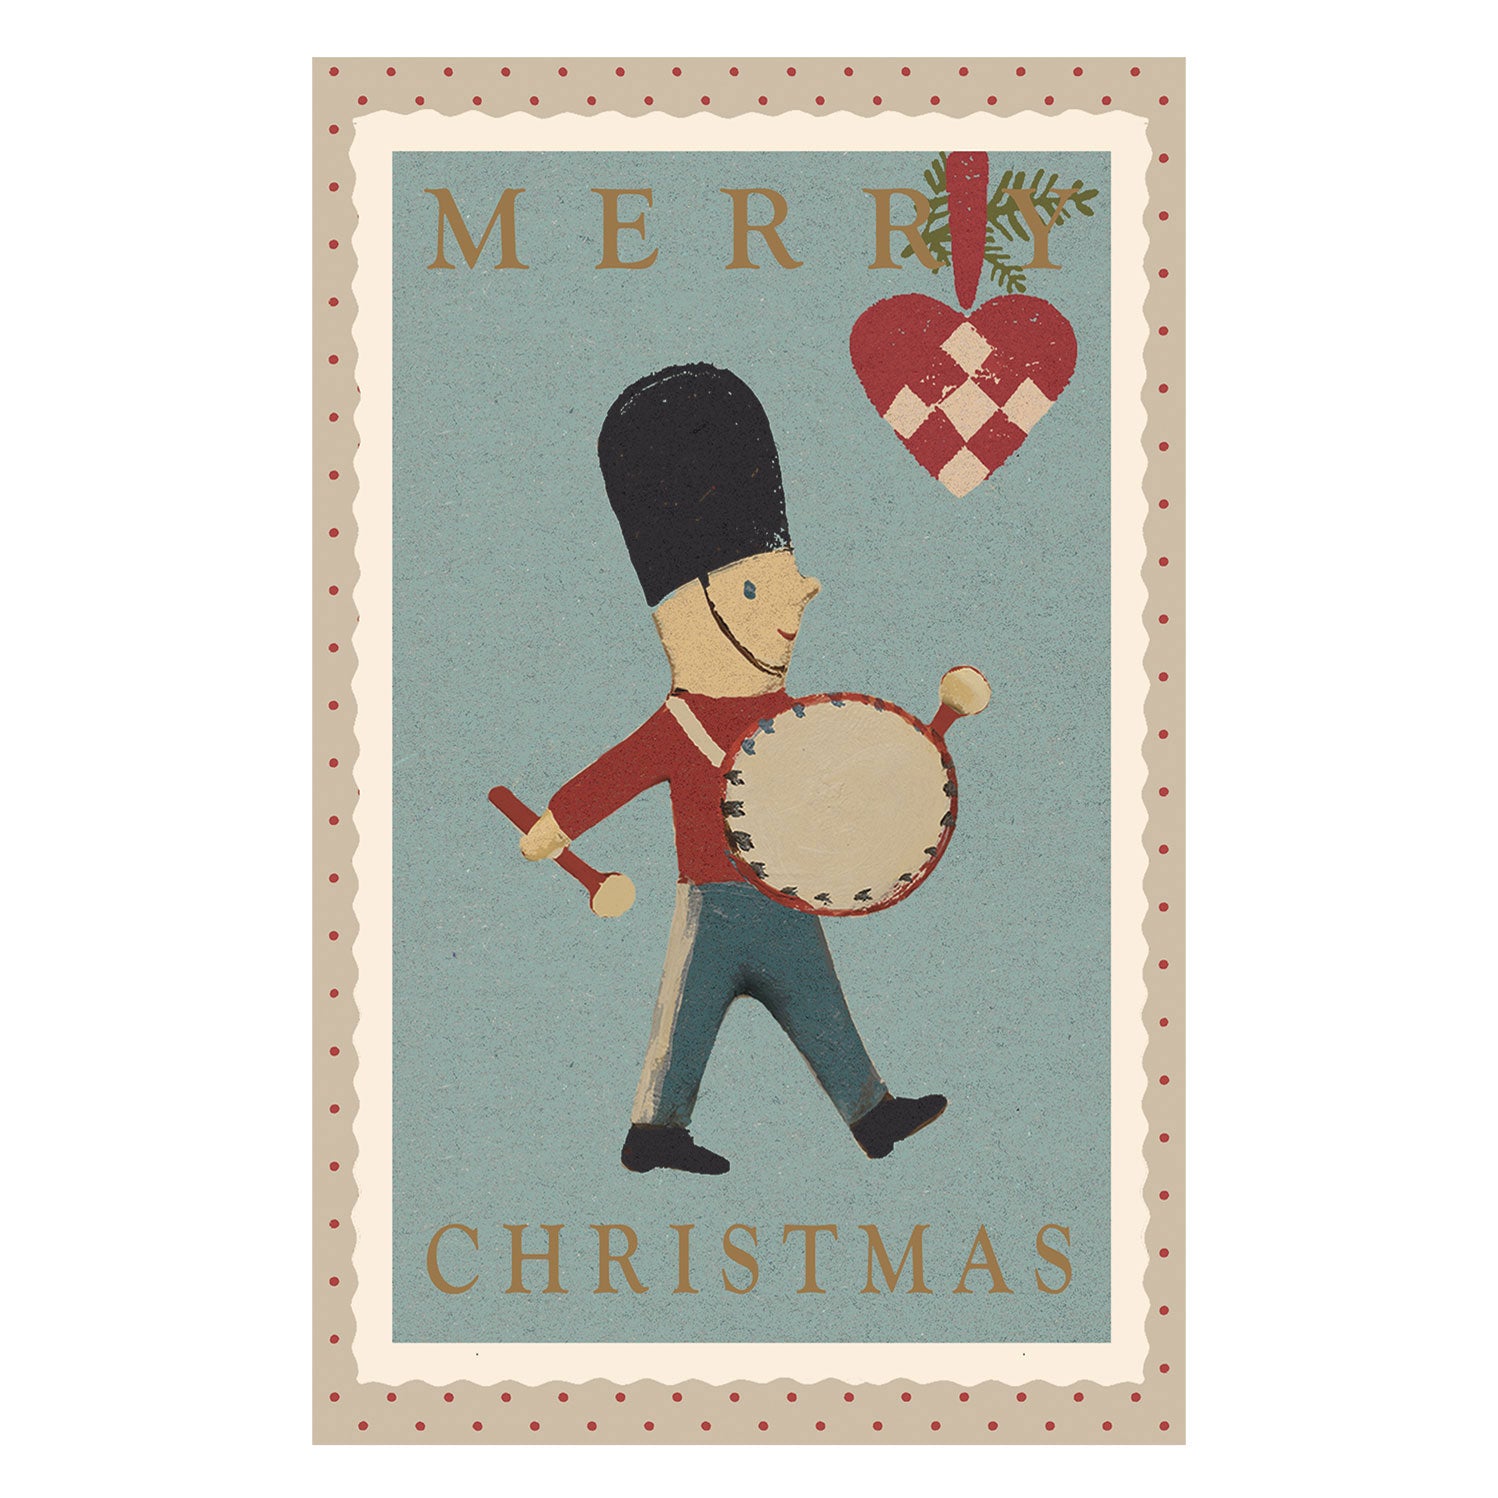  Maileg Vintage Toy playing drums Christmas Card by Maileg